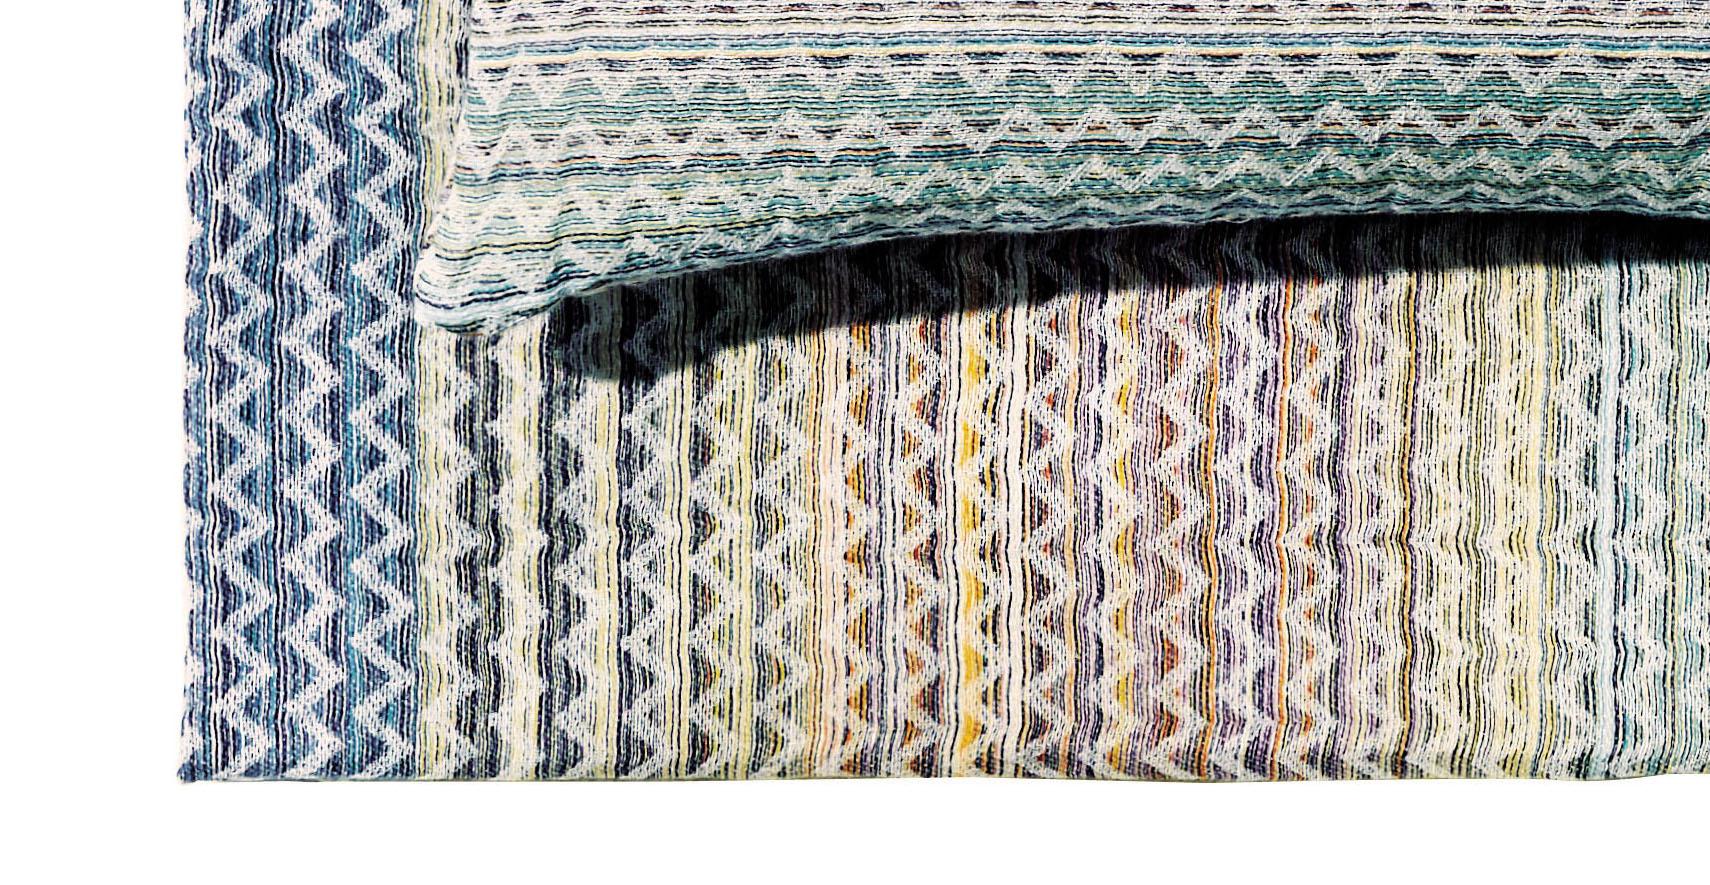 Light weight throw in a multi-color, chevron design. Perfect for adding an elegant touch to any bedroom or living room.

Composition: 55% linen, 40% cotton, 5% polyester. Care: delicate dry-clean with perchlorethylene. Throw dimensions: W 39 in x H